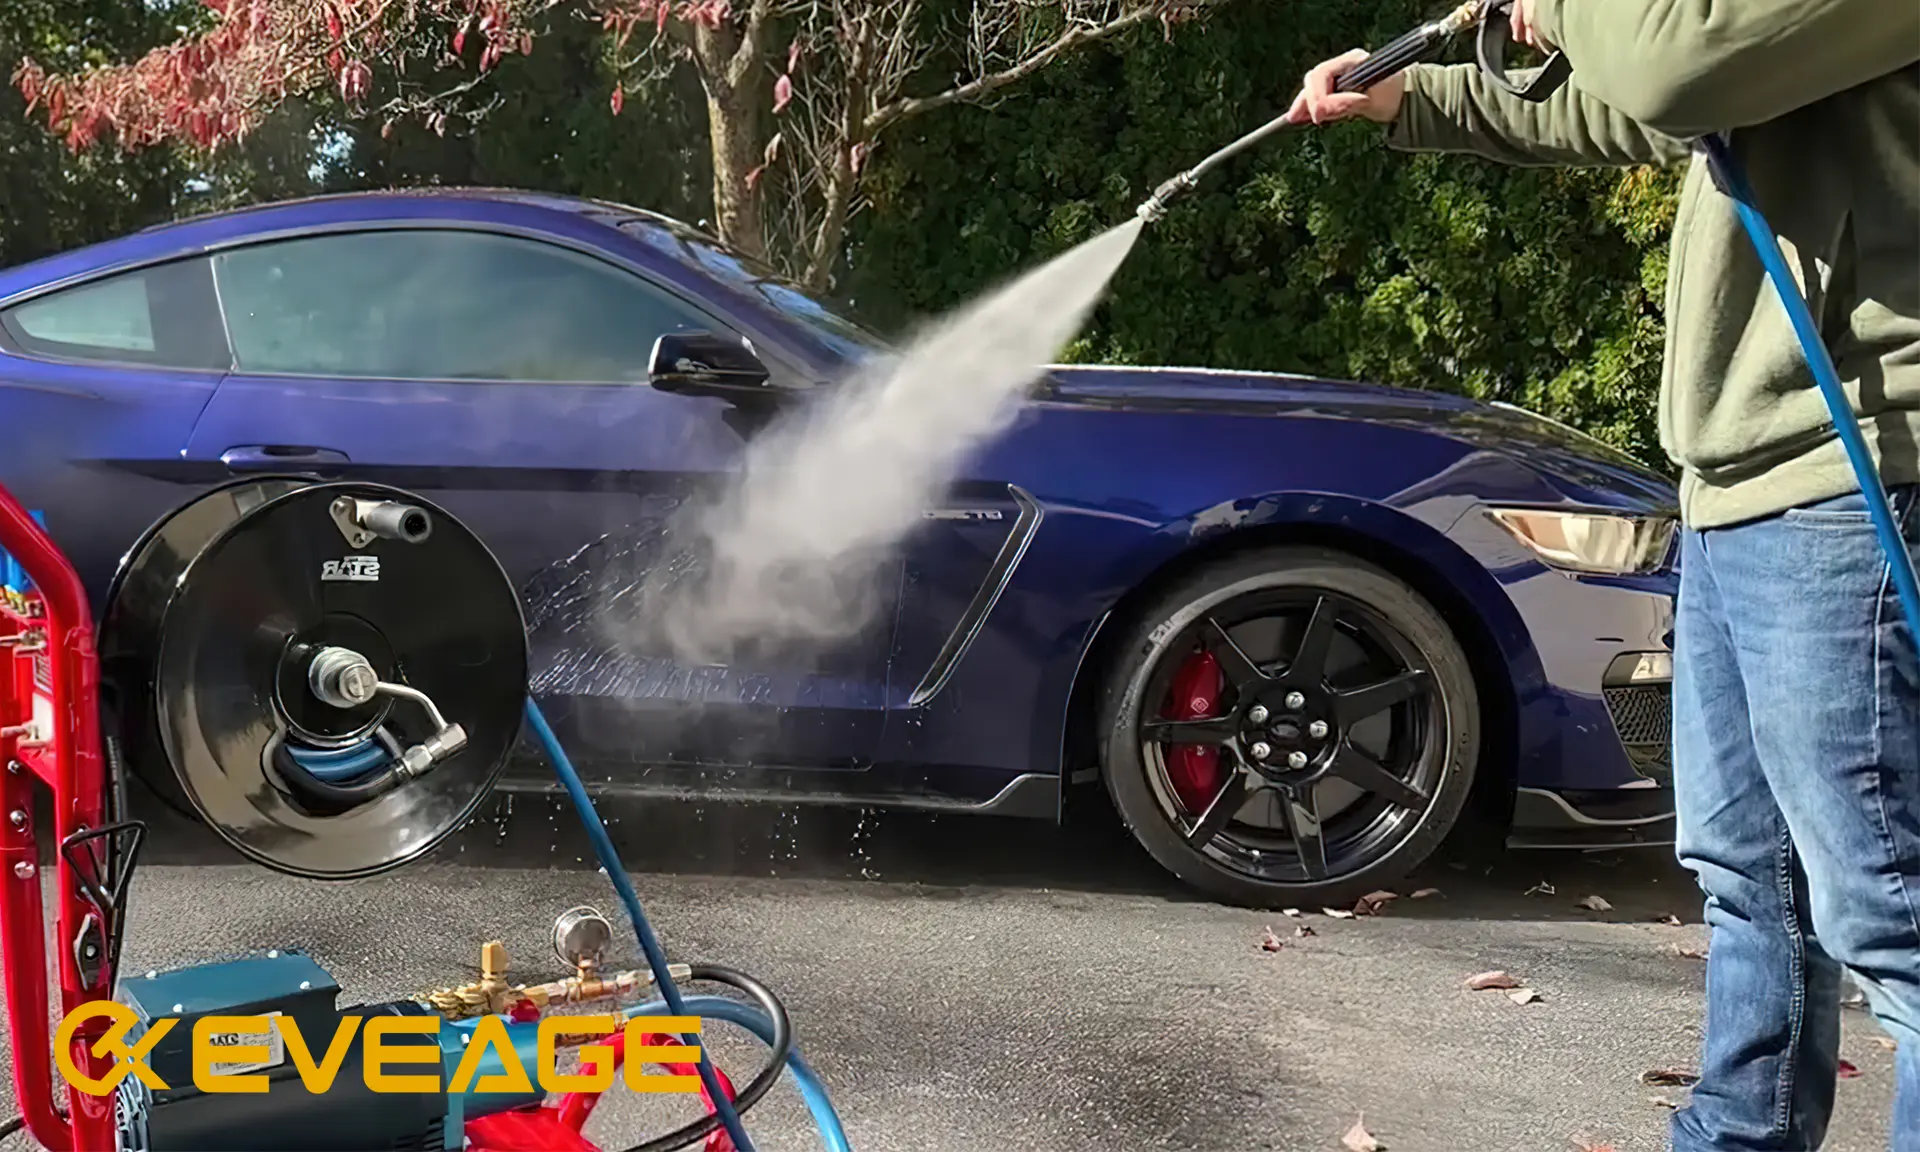 turn-a-garden-hose-into-a-pressure-washer